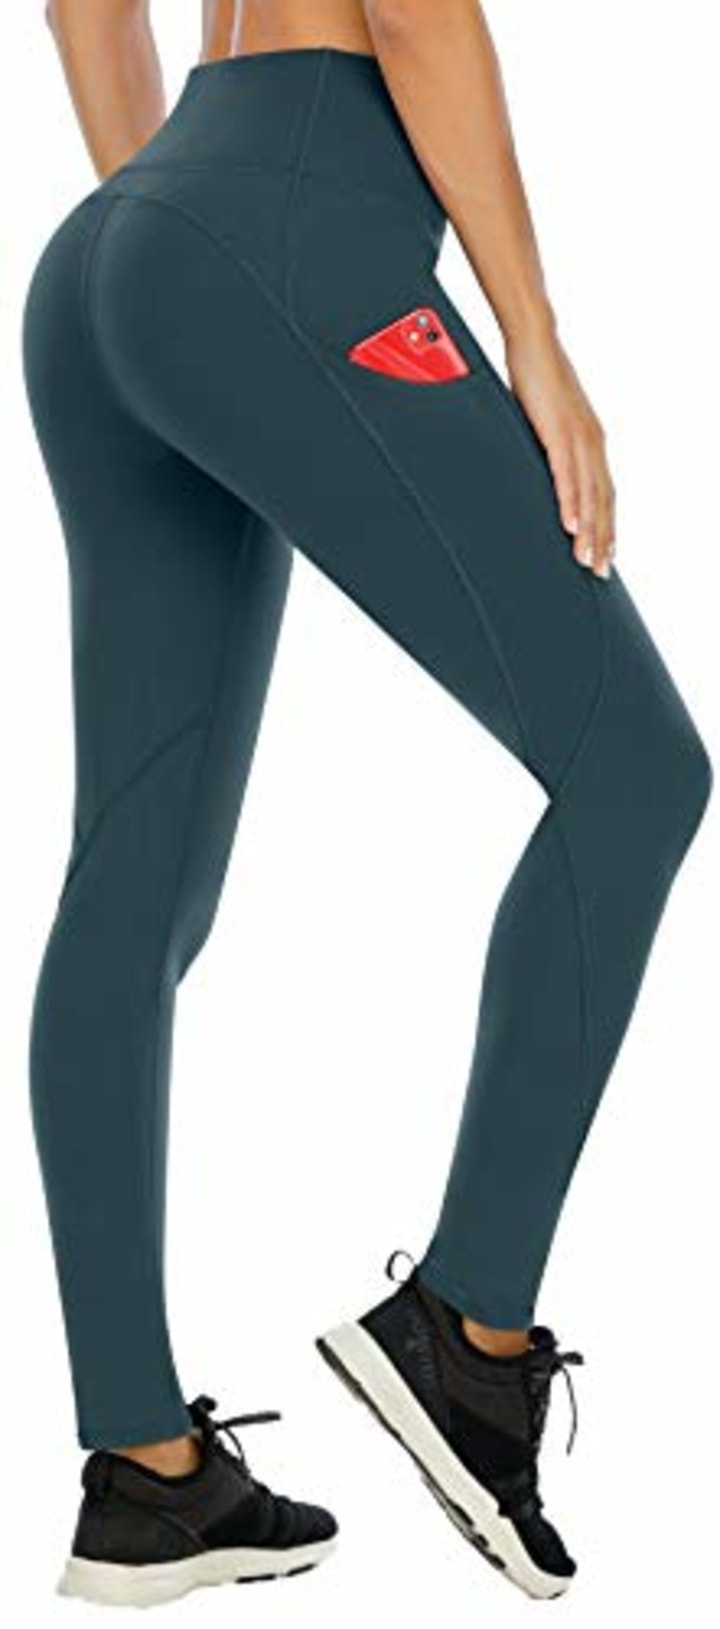 LastFor1 Womens High Waisted Yoga Pants Tummy Control Leggings with Dual Pockets for Workout Running Gym